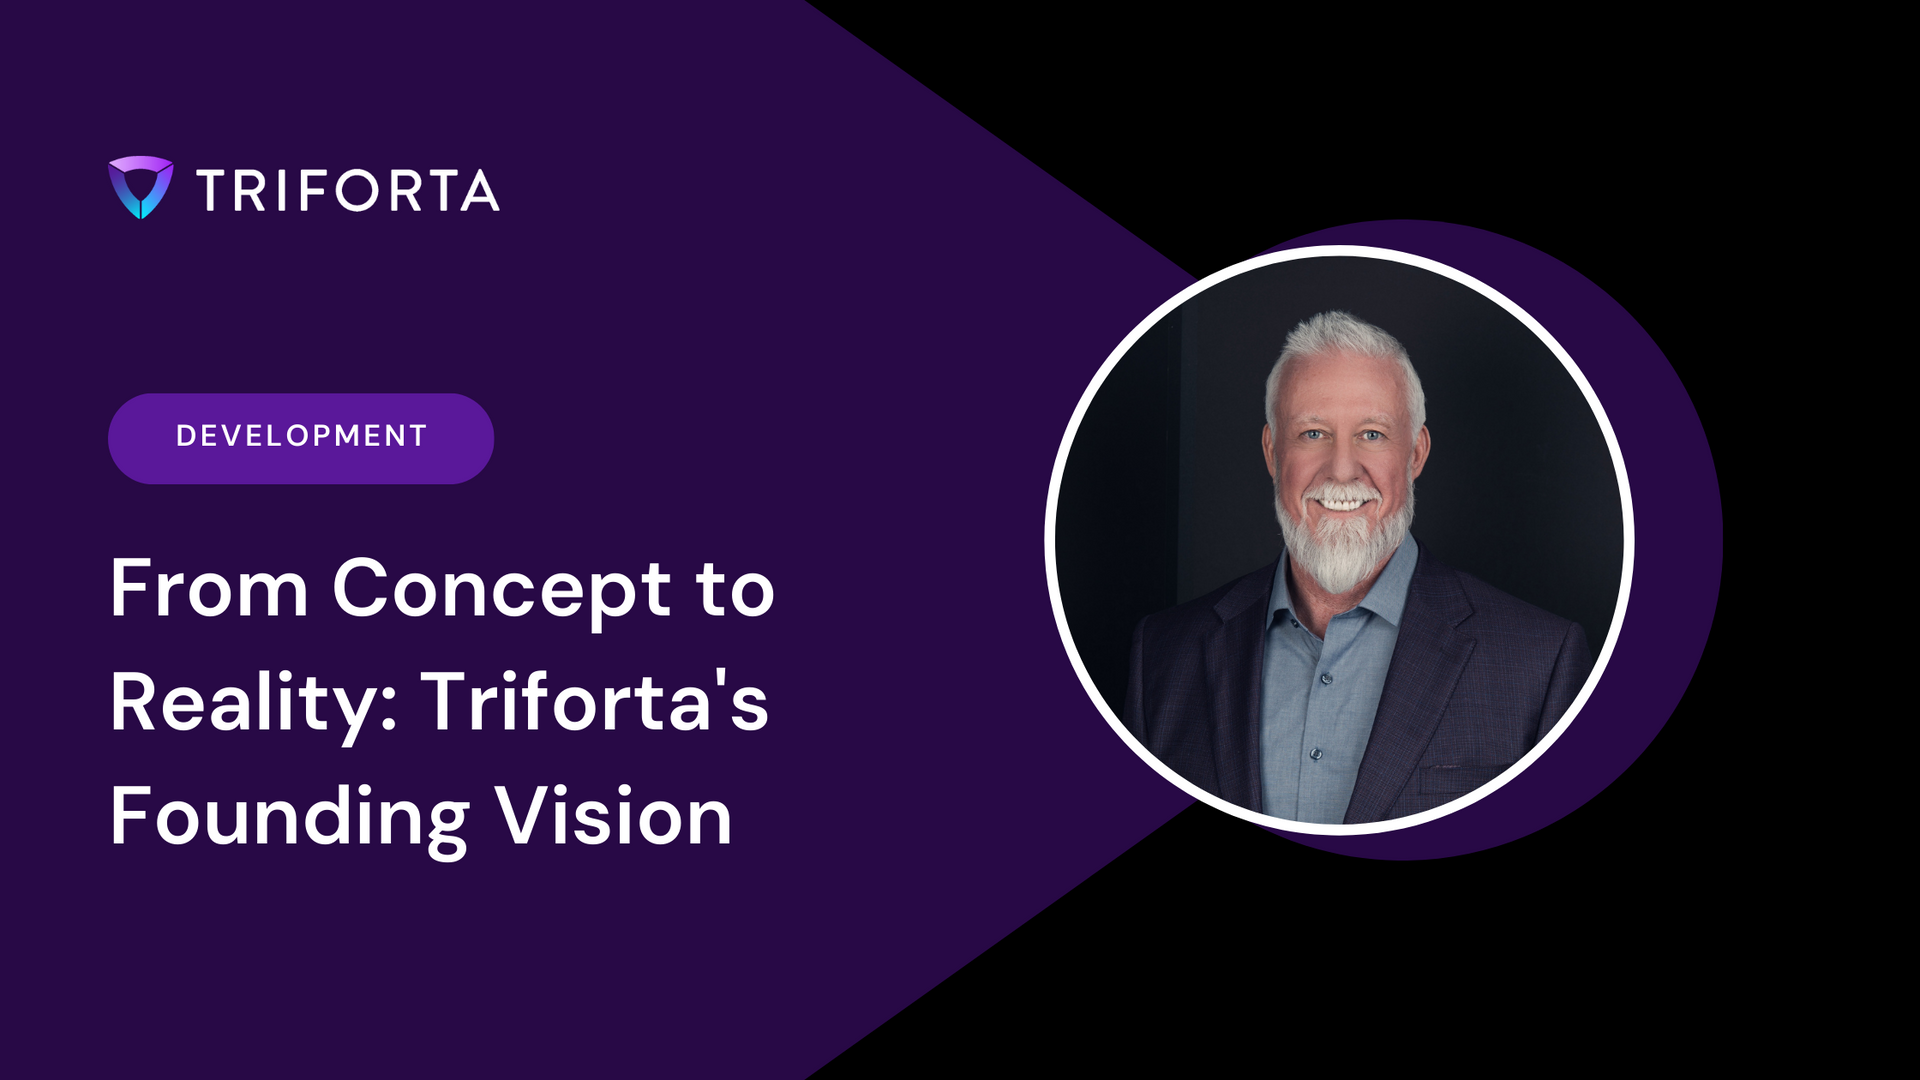 From Concept to Reality: Triforta's Founding Vision